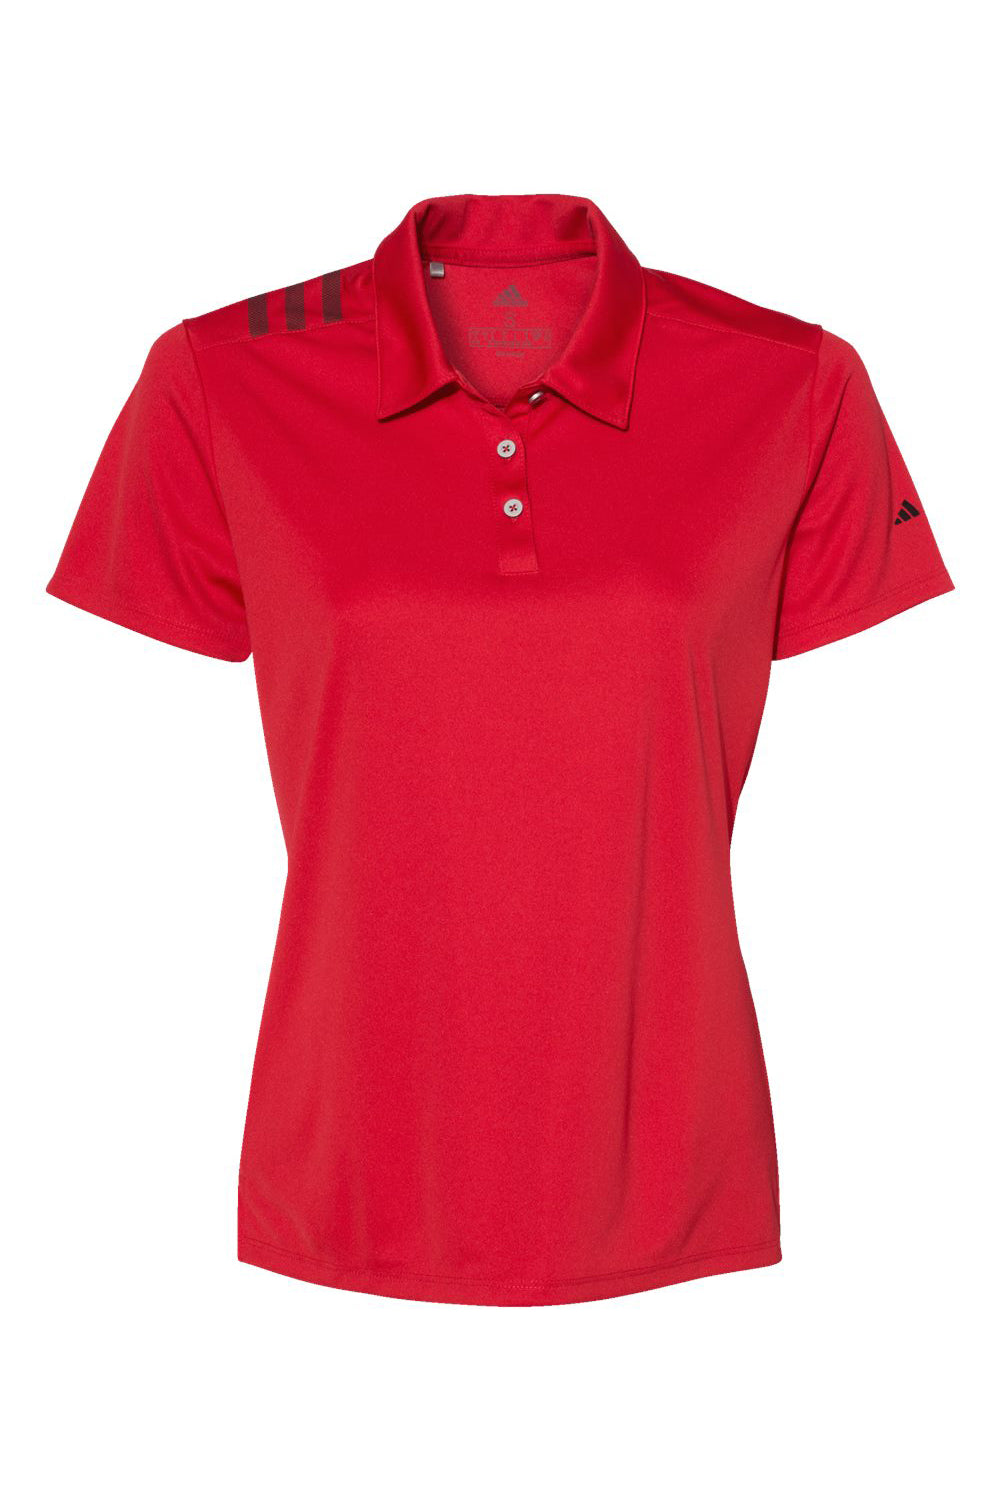 Adidas A325 Womens 3 Stripes UPF 50+ Short Sleeve Polo Shirt Collegiate Red/Black Flat Front